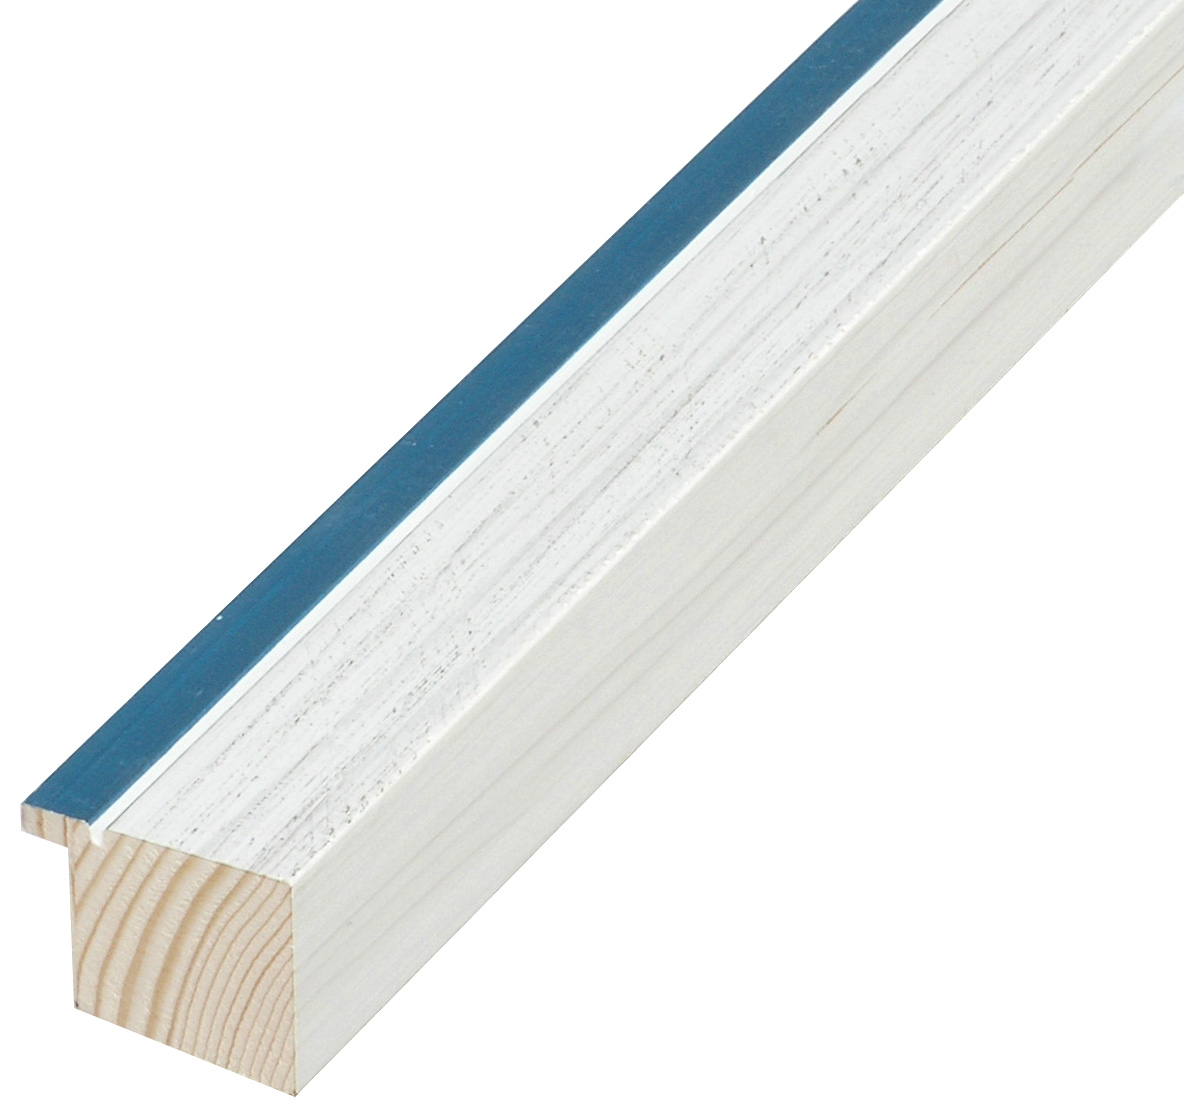 Moulding finger-jointed pine height 33mm - White, blue edge - 716BLU